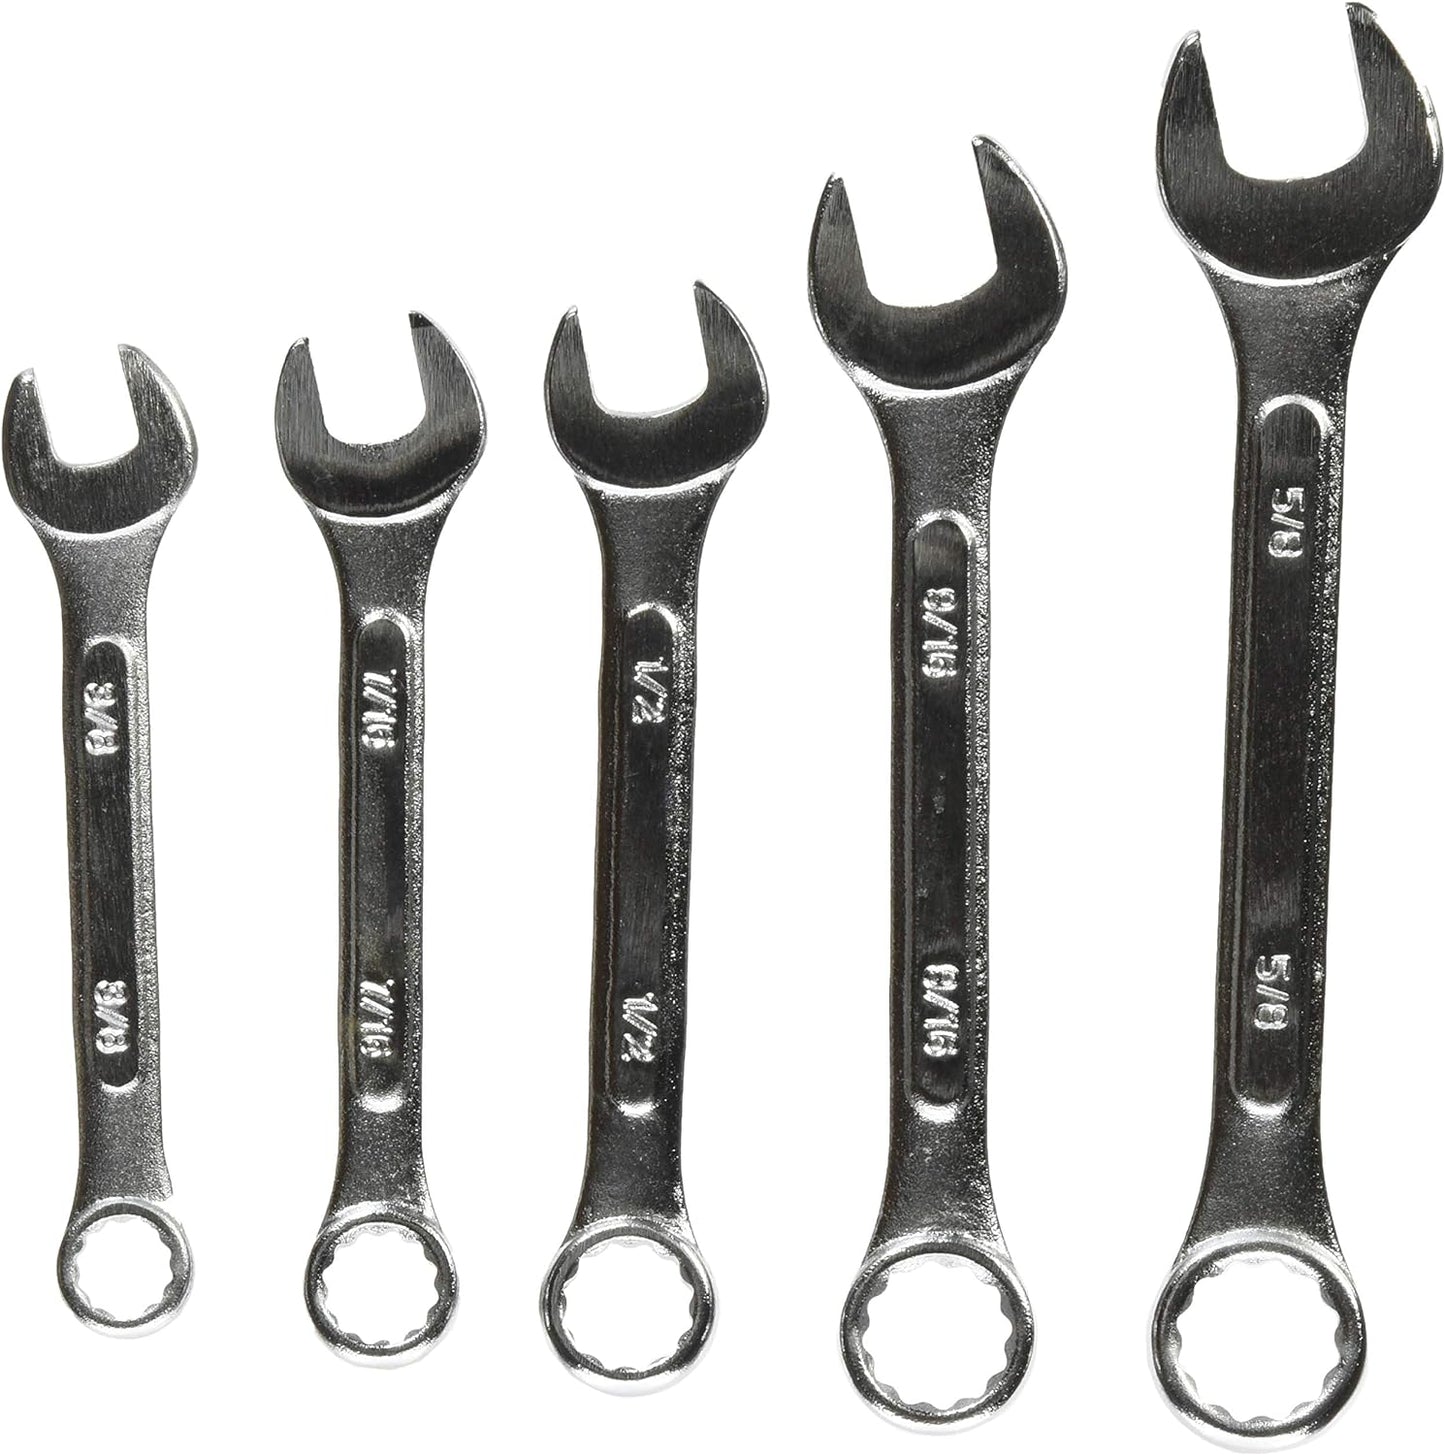 GreatNeck COW5C 5 Piece Combination Wrench Set, Open End Wrench Set, SAE Combination Wrench Set, Standard Combination Wrench Set